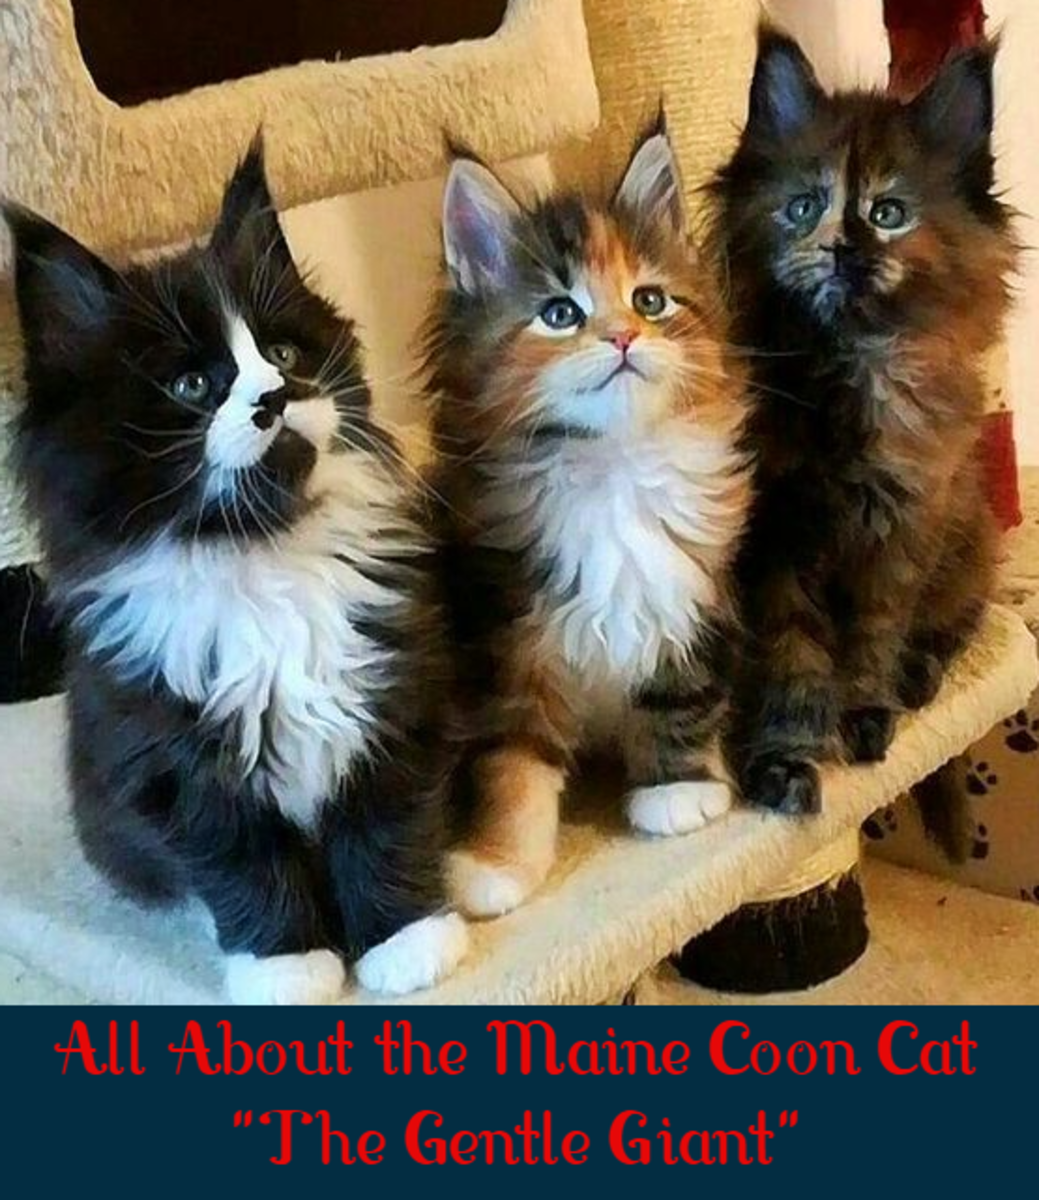 All About the Maine Coon Cat - 